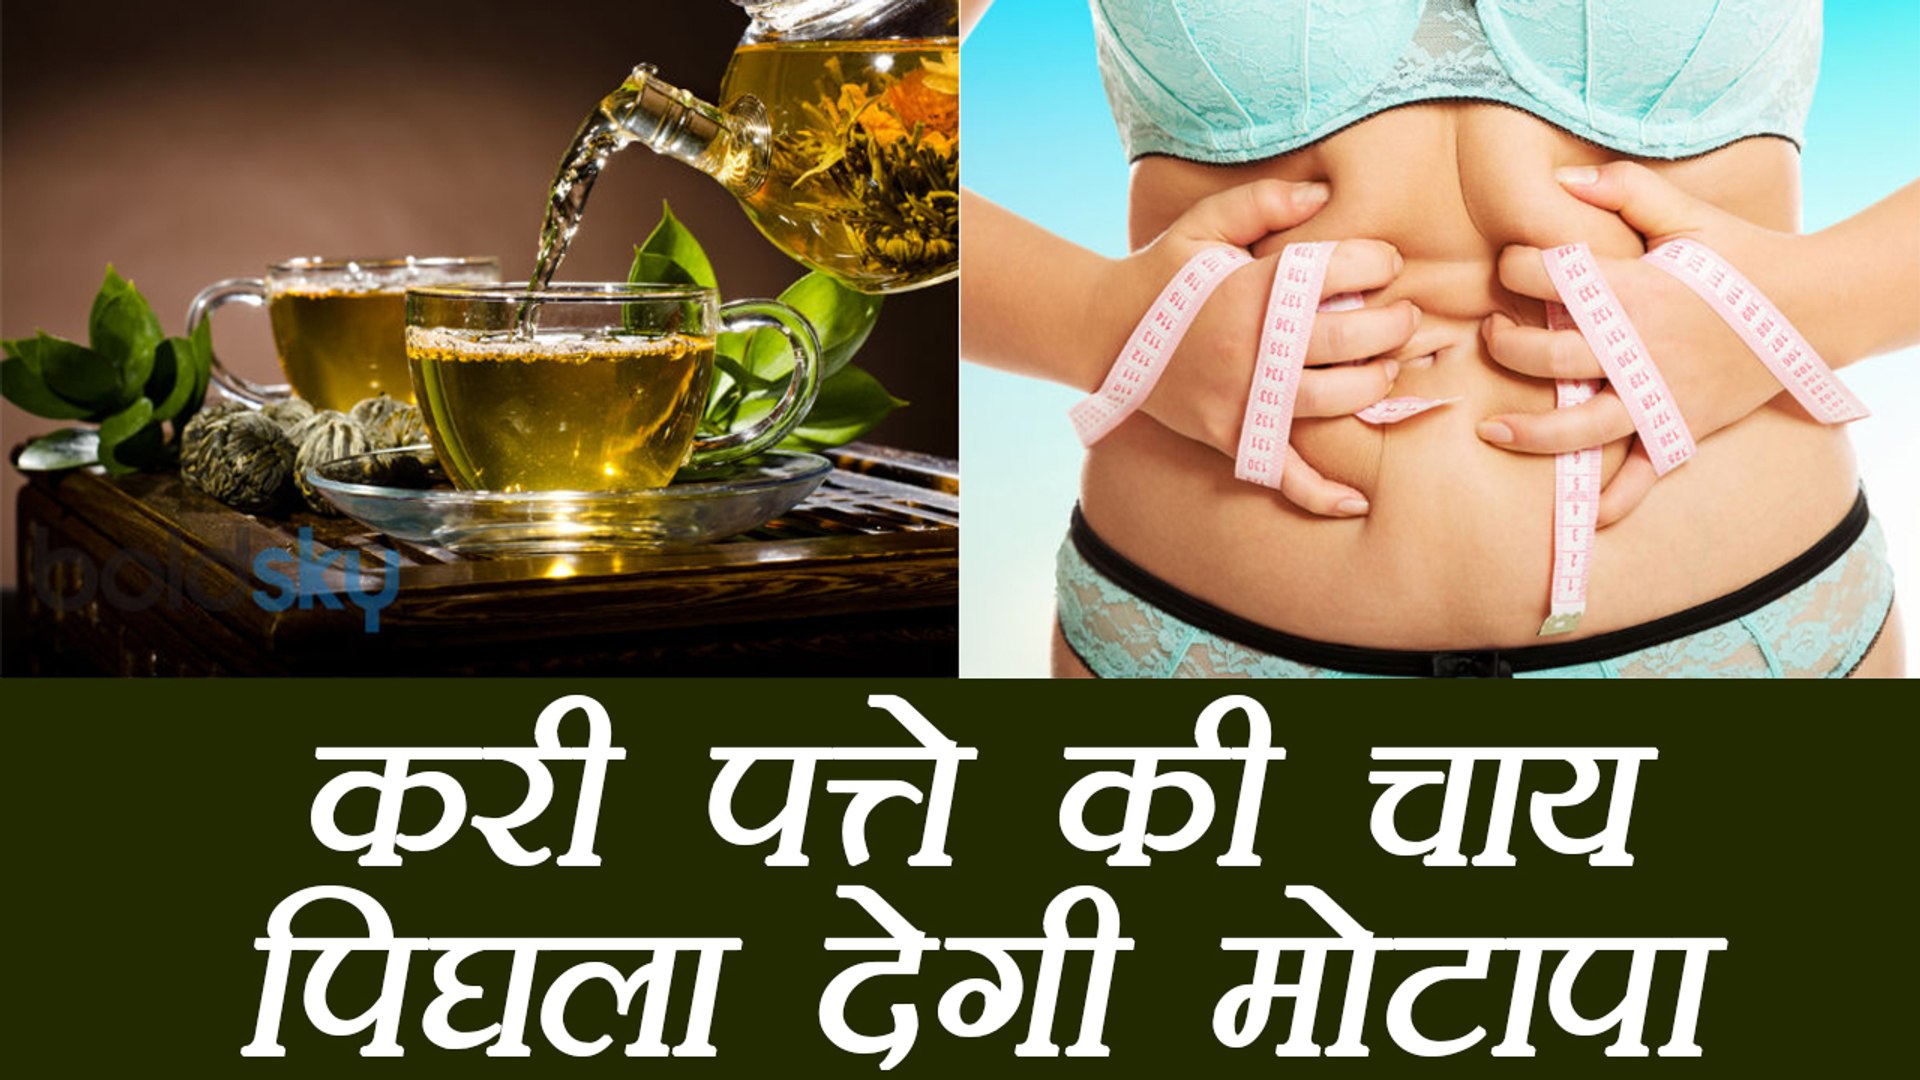 Health benefits: If you eat curry leaves for 10 days, then something will happen that you will be really shocked